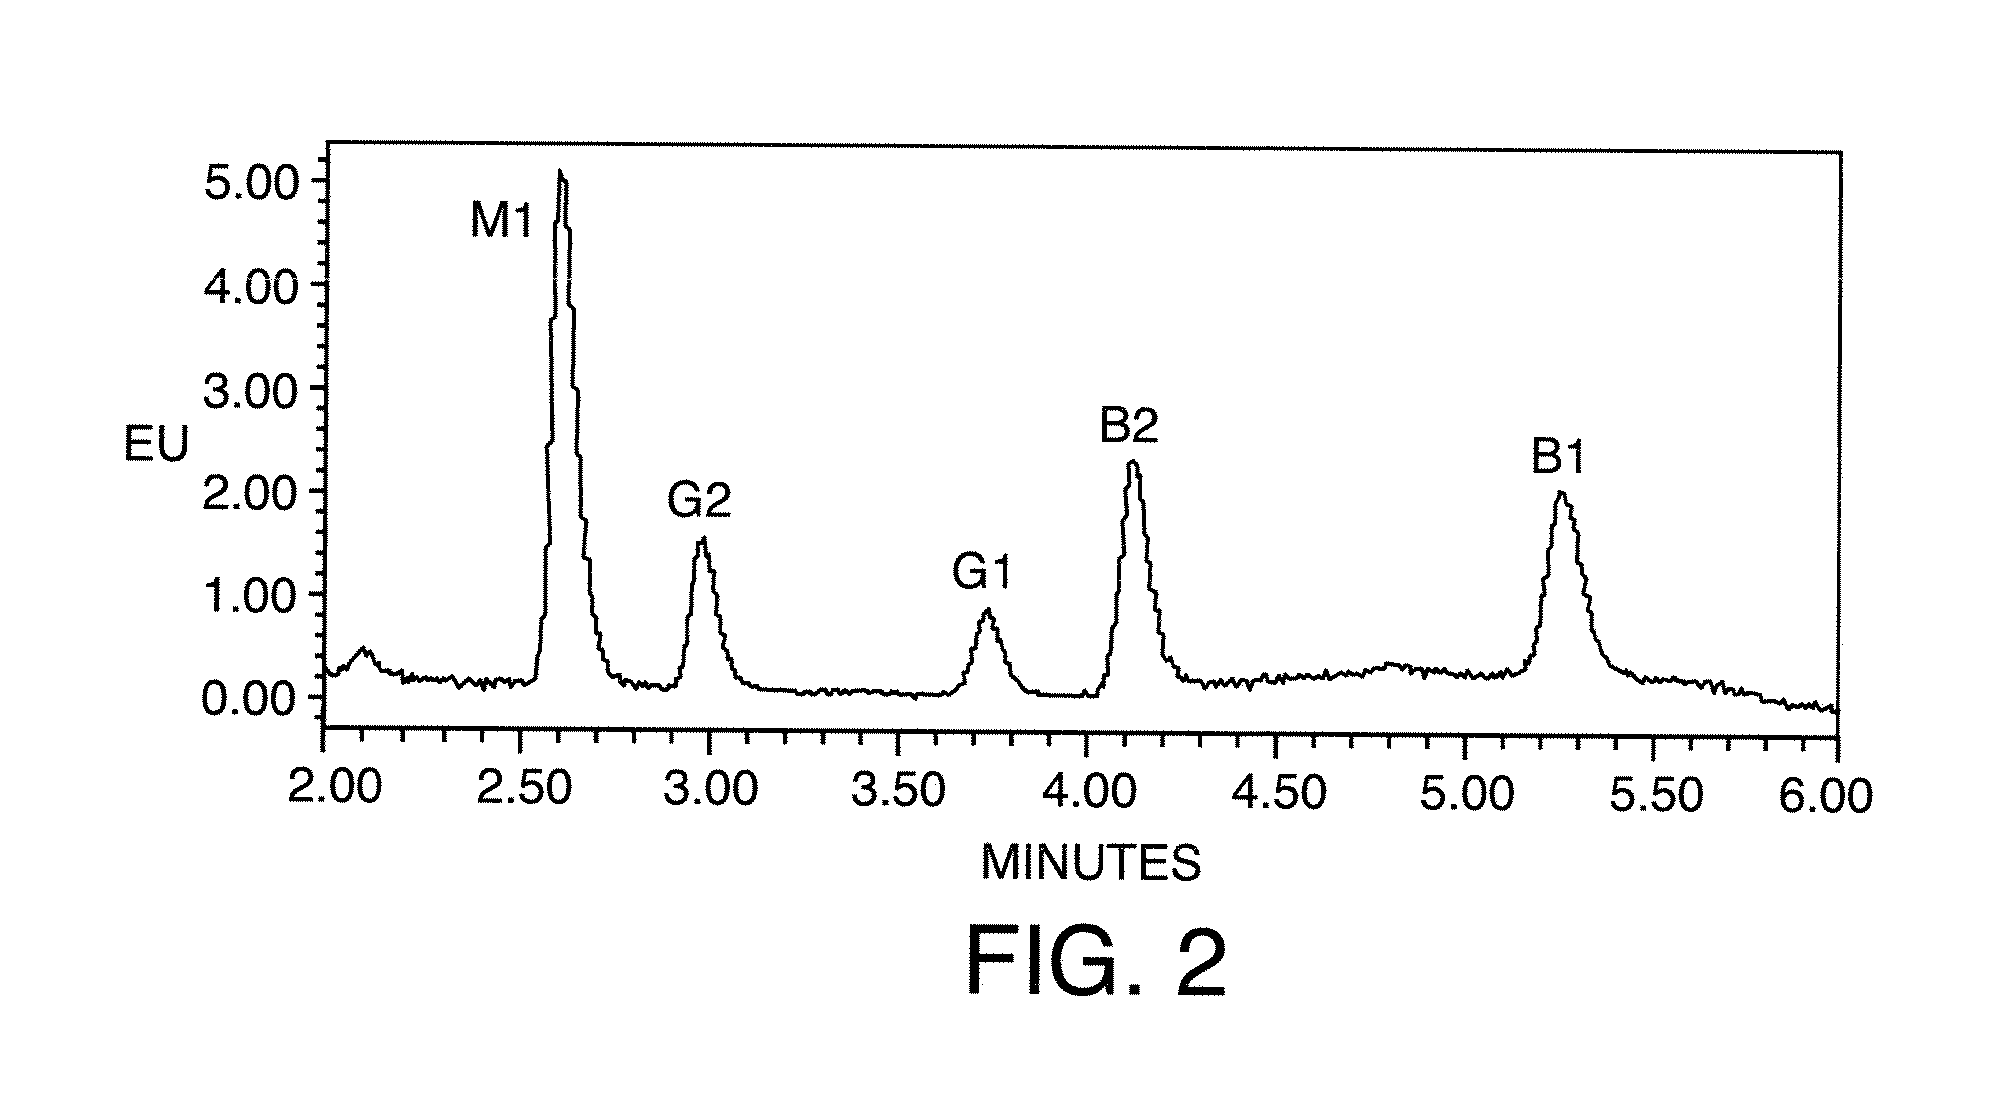 Apparatus and methods for performing photoreactions and analytical methods and devices to detect photo-reacting compounds